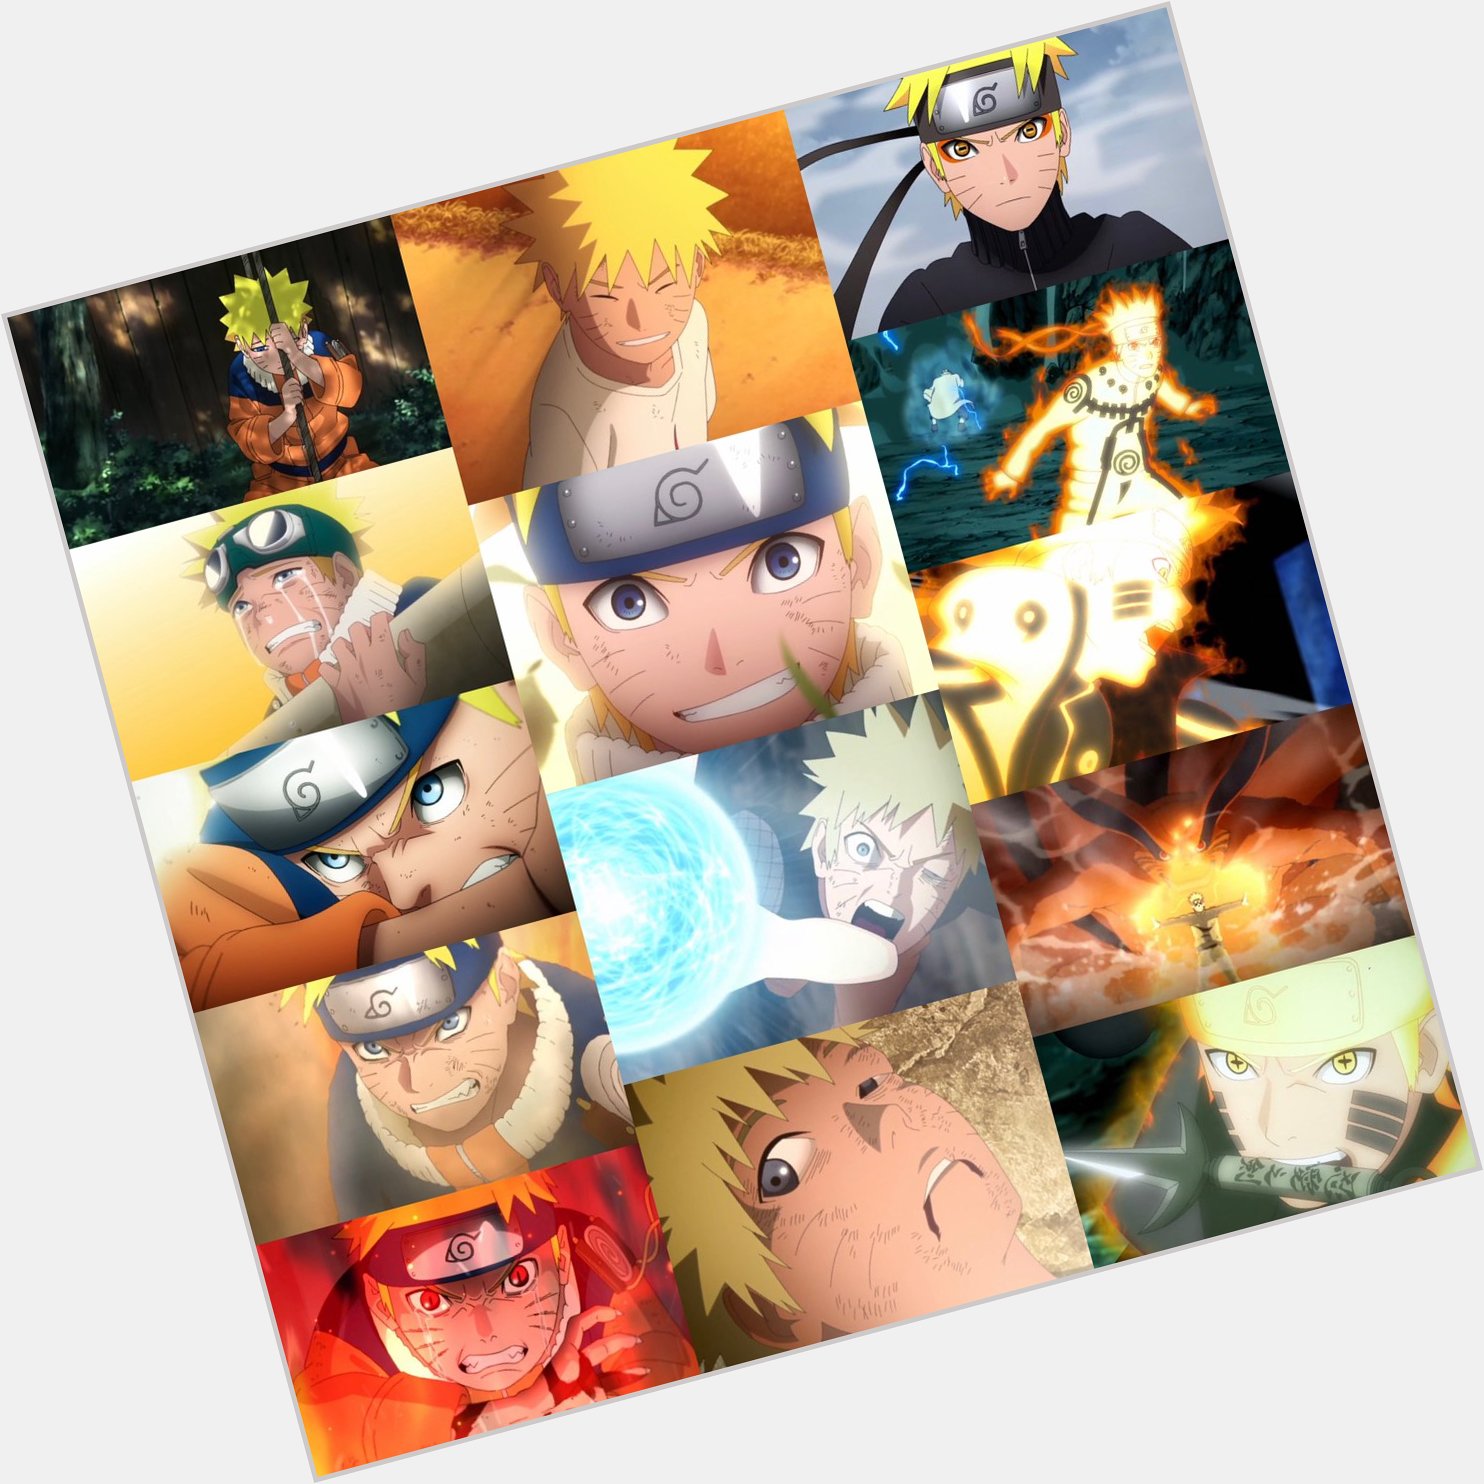 Happy birthday to one of the best main characters of all time in anime, the Naruto Uzumaki! 